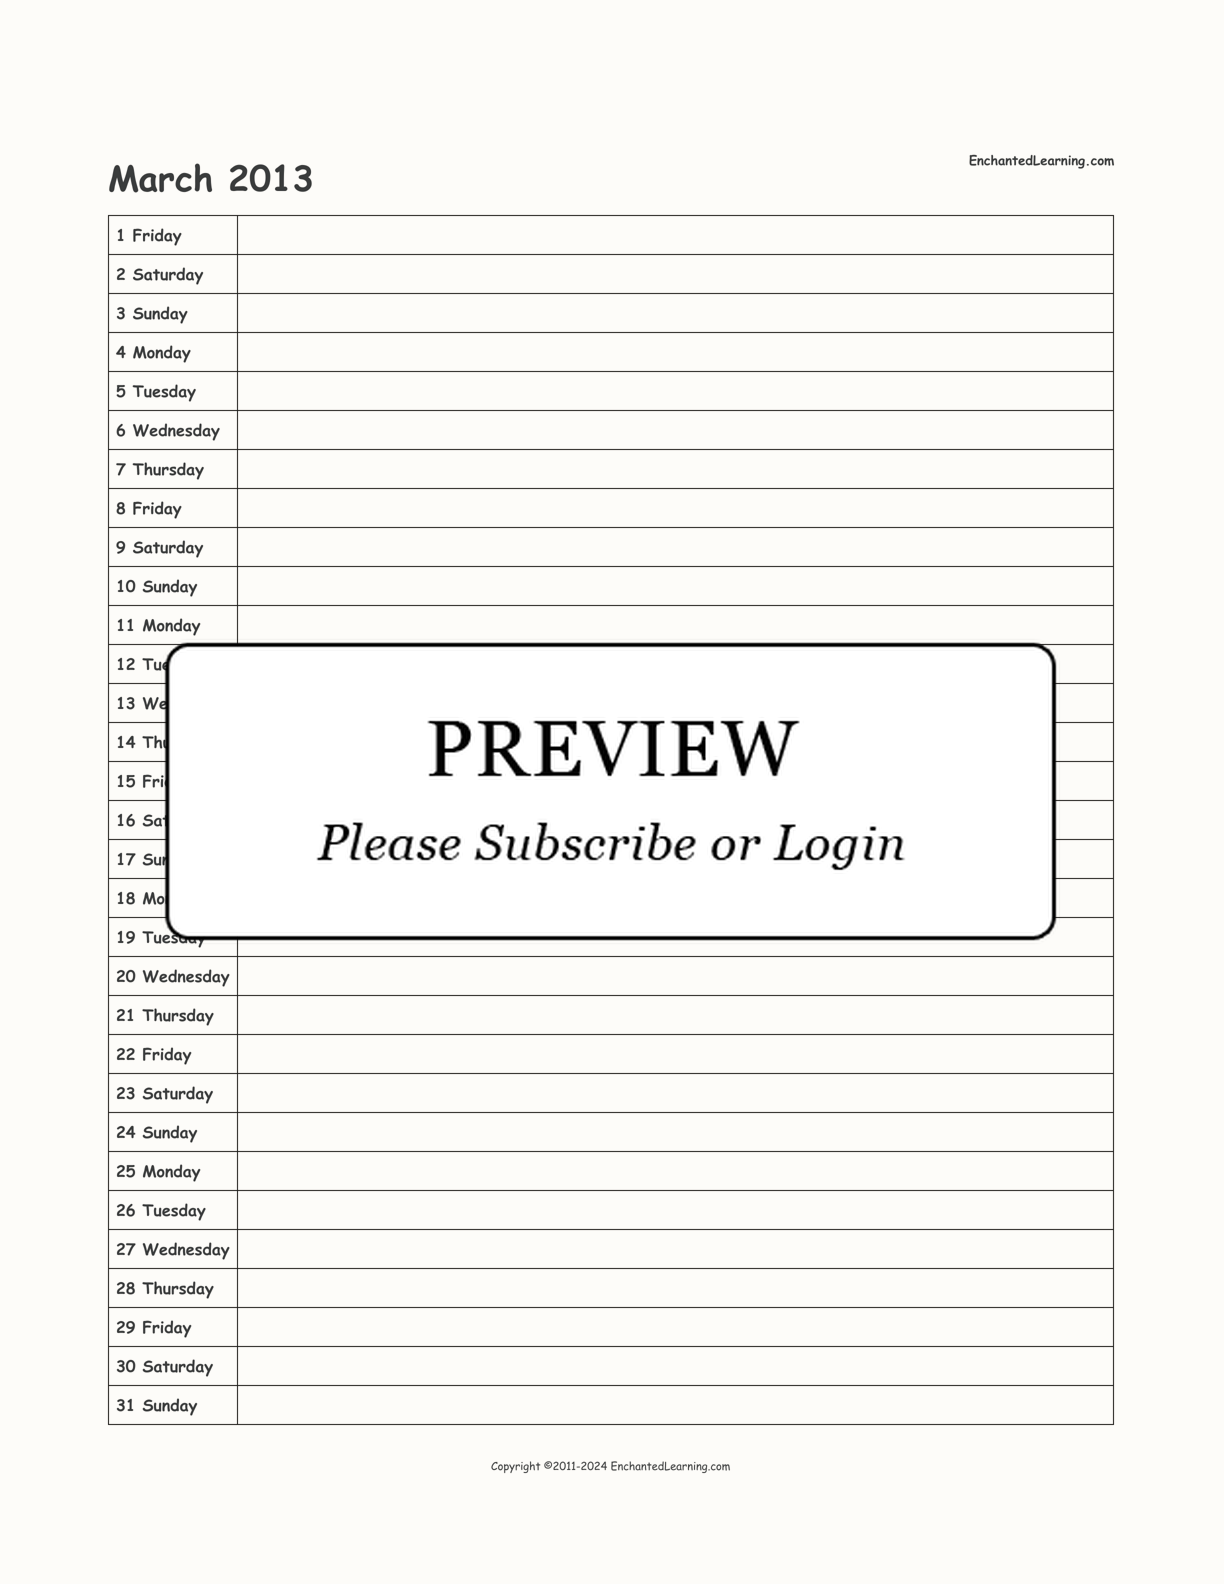 2013 Scheduling Calendar interactive printout page 3